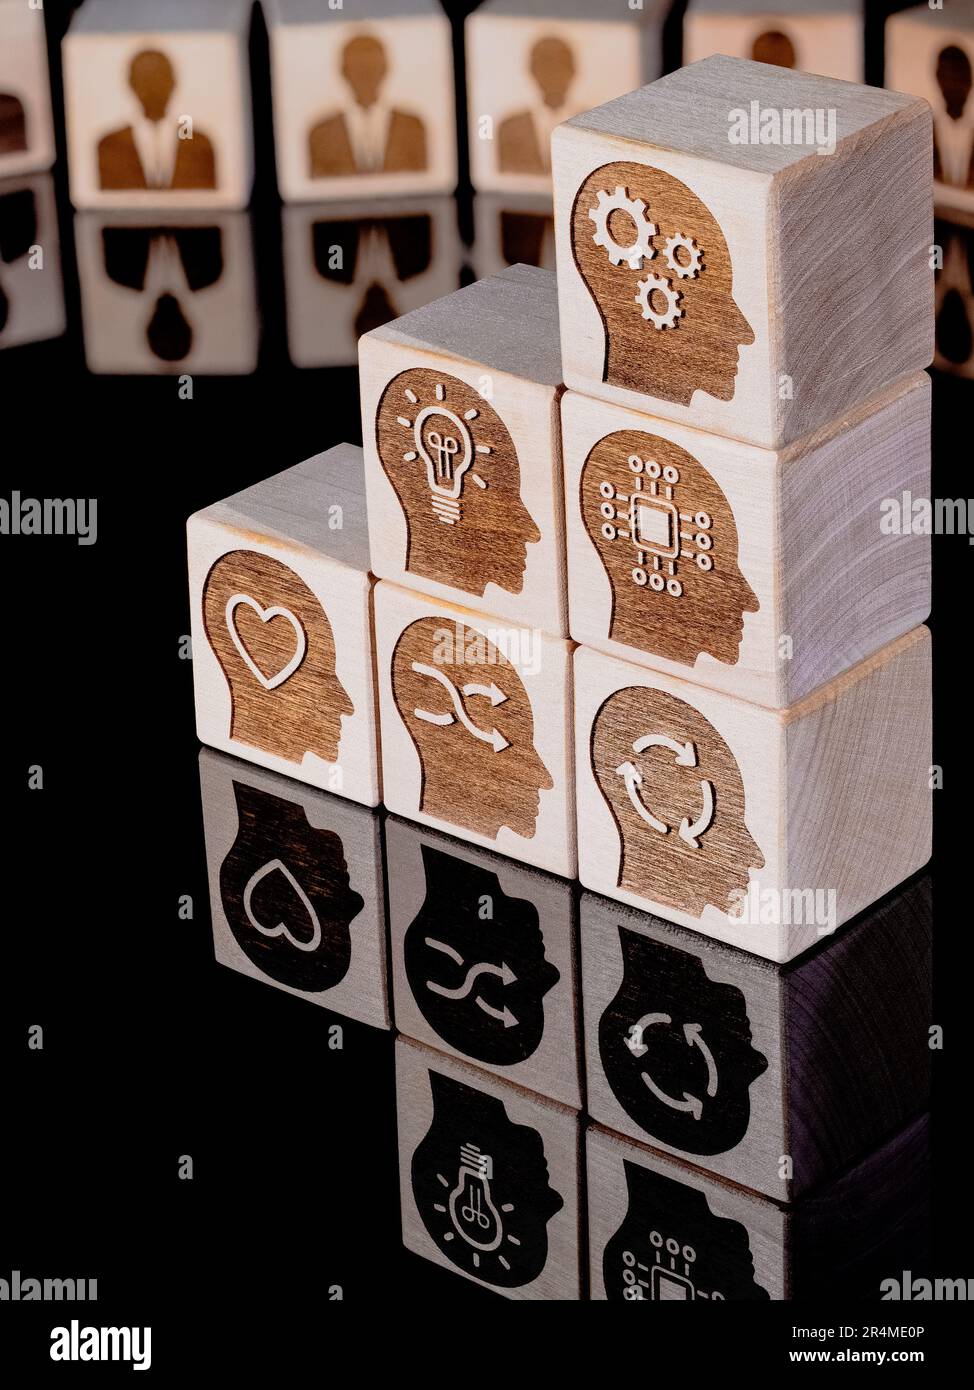 DIGITAL, THINKING and TECHNICAL symbols on wooden cubes as management skills concept Stock Photo